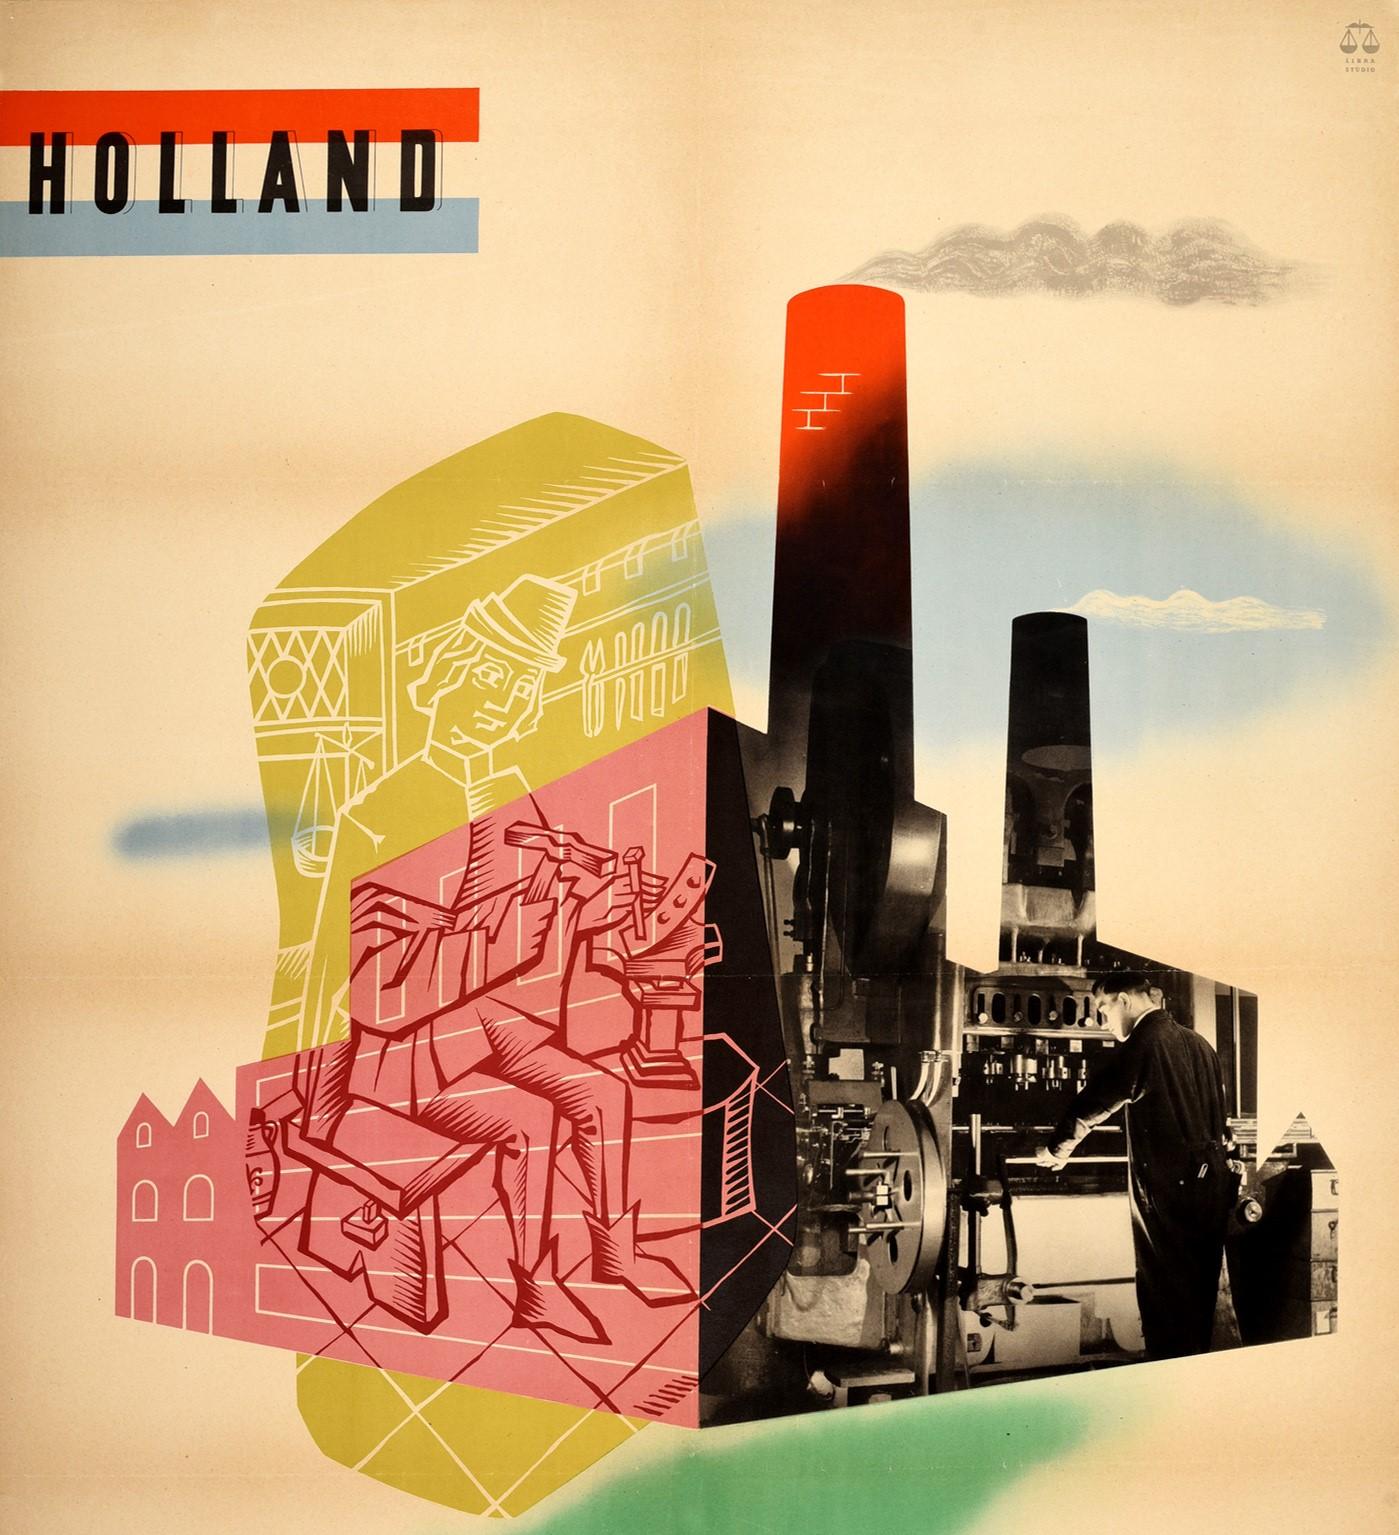 Original Vintage Poster Holland Tradition Tools Skill Netherlands Industry Photo - Print by Unknown